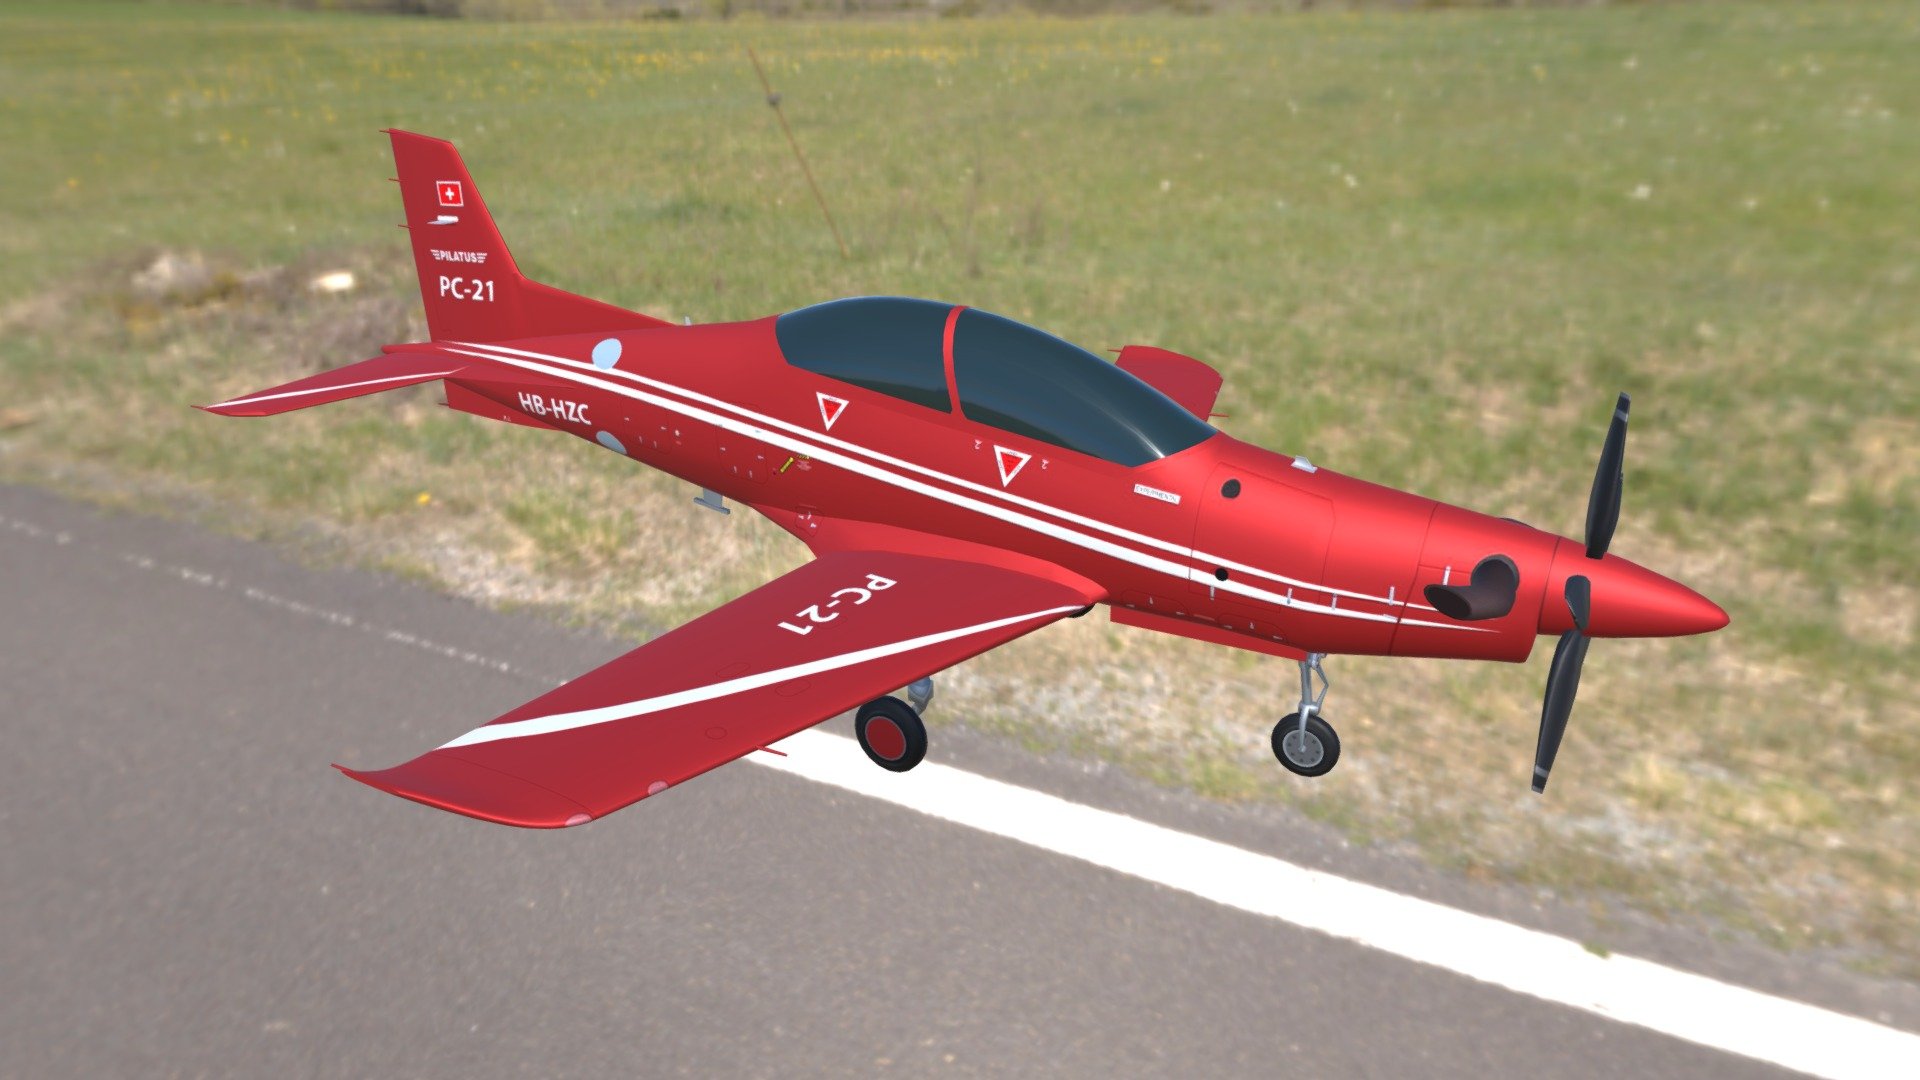 3d modelPilatus PC-21 (English Pilatus PC-21) is a Swiss two-seat training low-wing aircraft with a turboprop engine, developed by the aircraft company &ldquo;Pilatus Aircraft